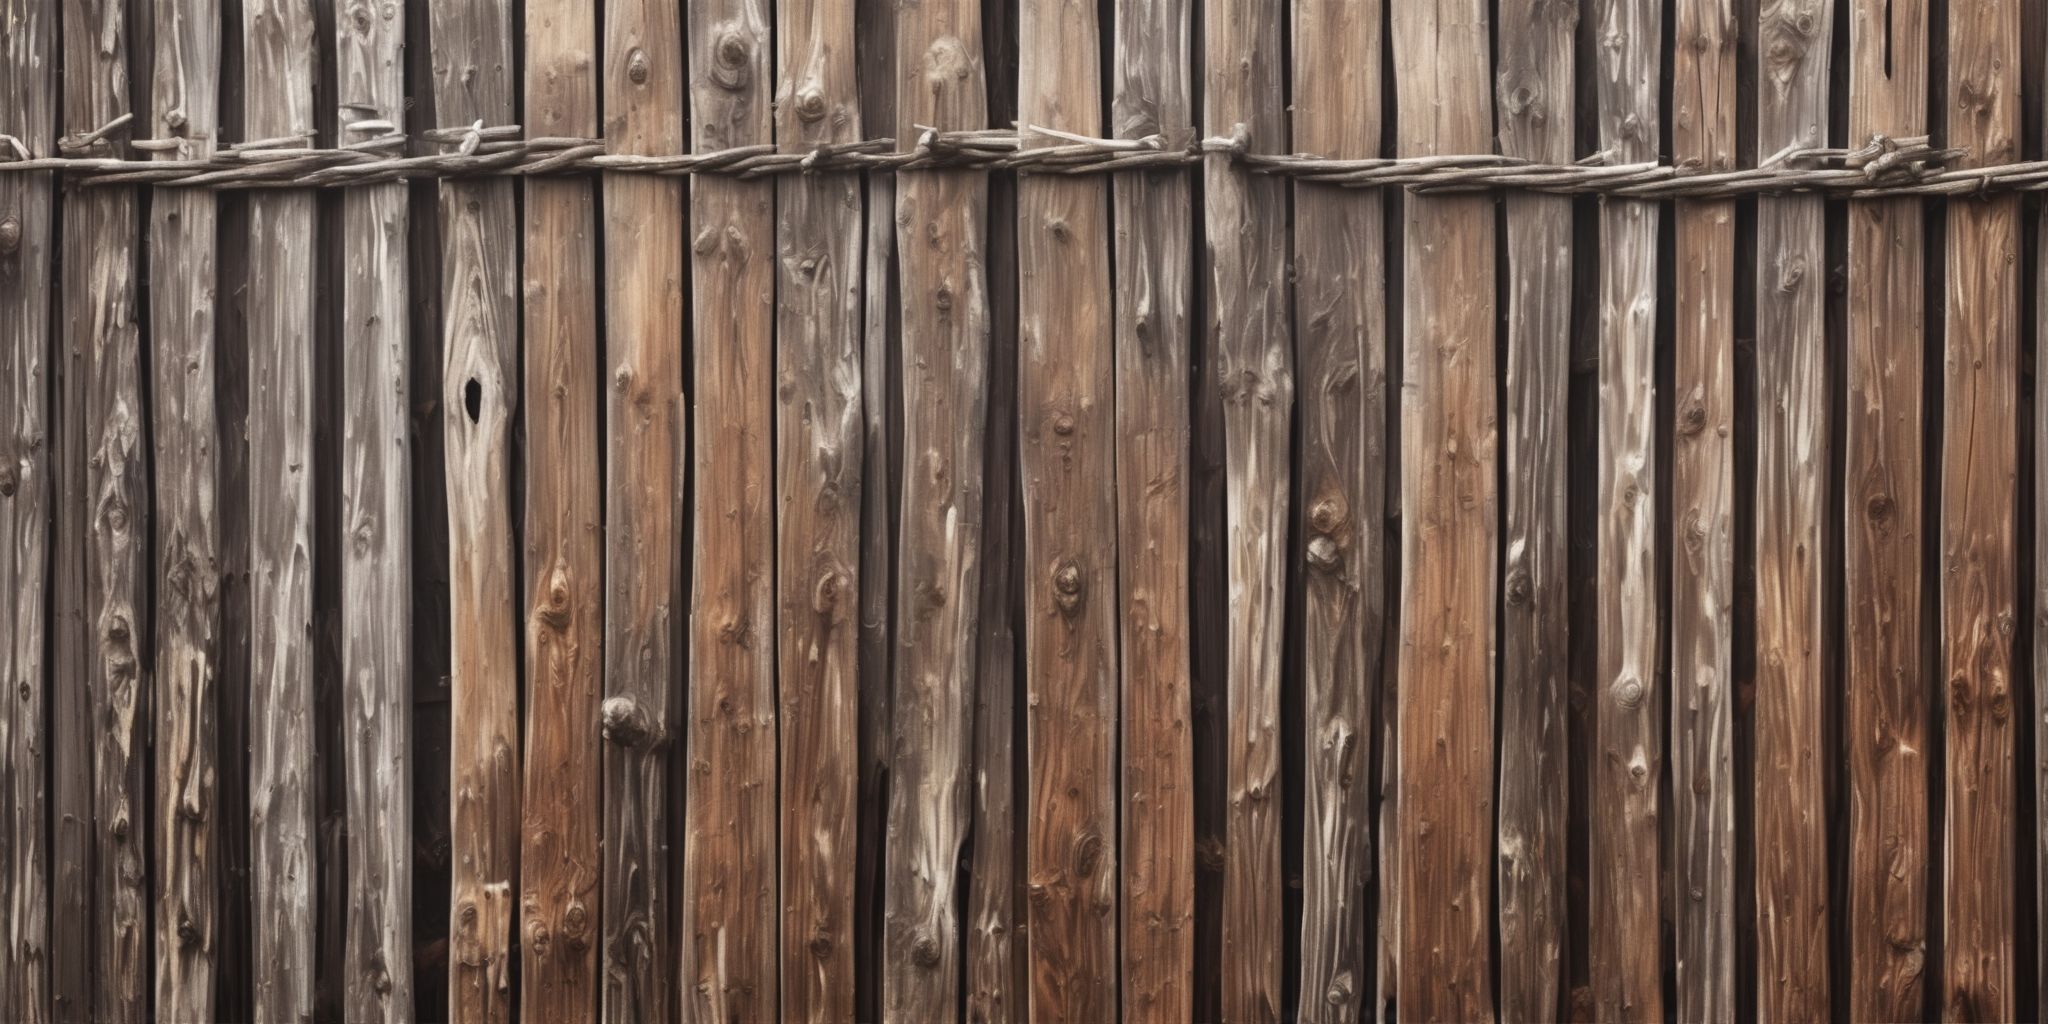 Fence  in realistic, photographic style